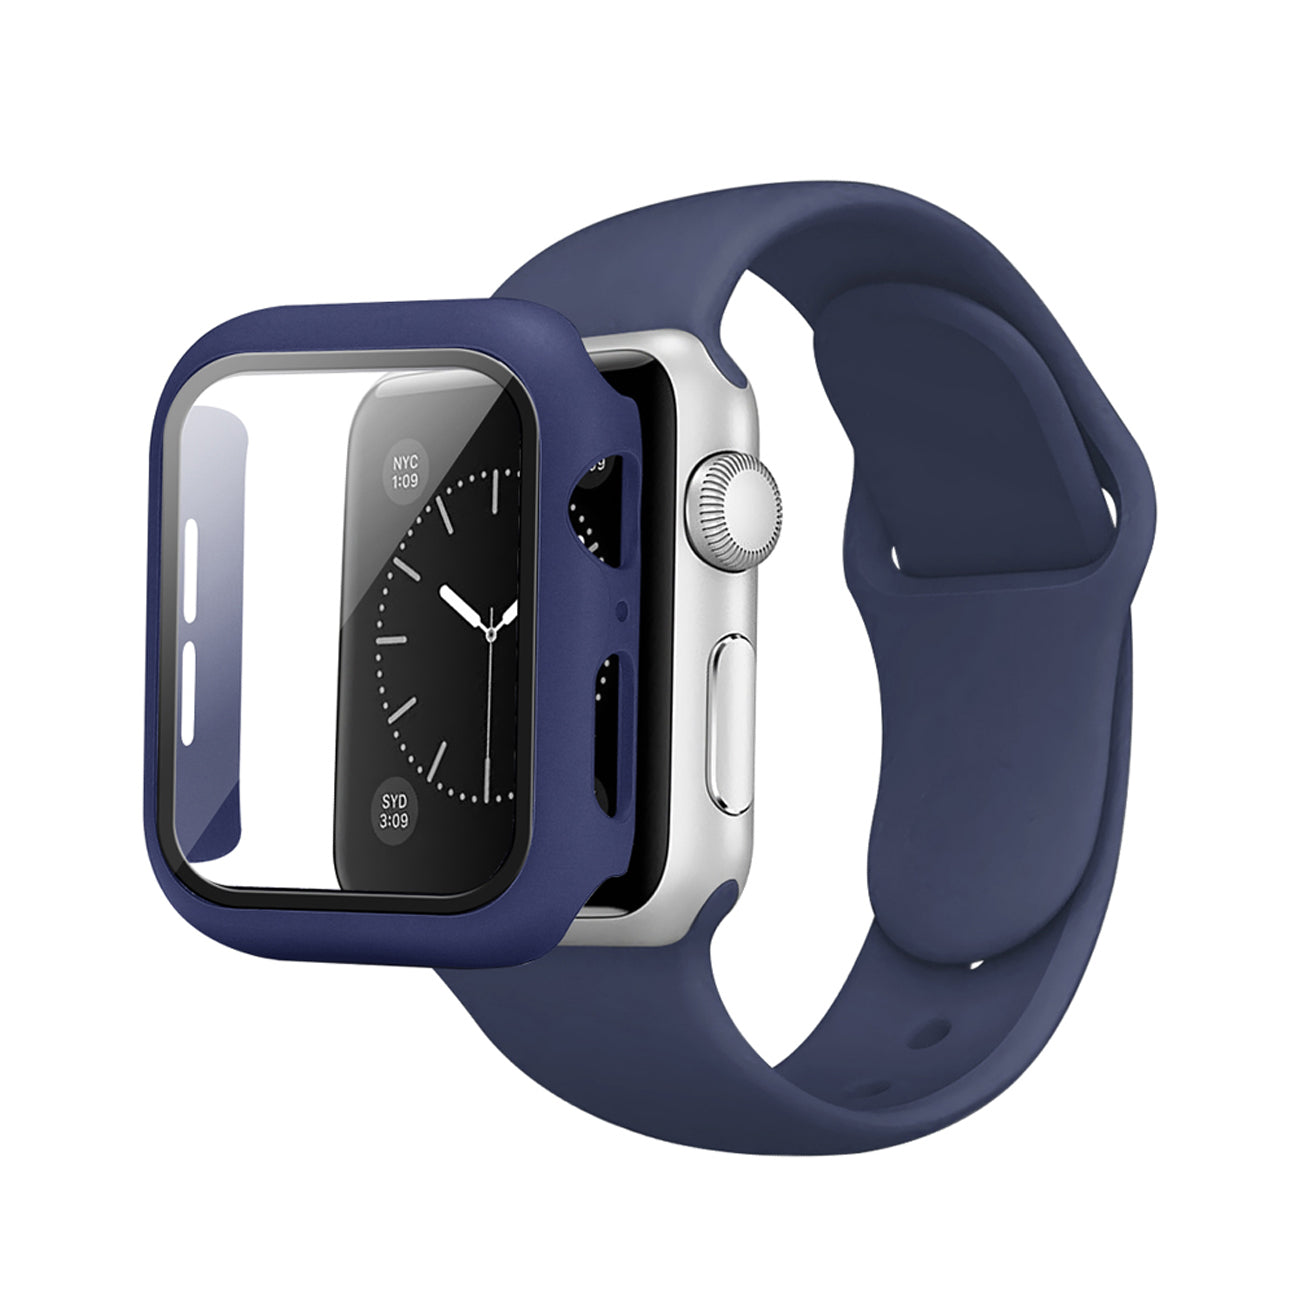 Watch Case PC With Glass Screen Protector, Silicone Watch Band Apple Watch 38mm Navy Color